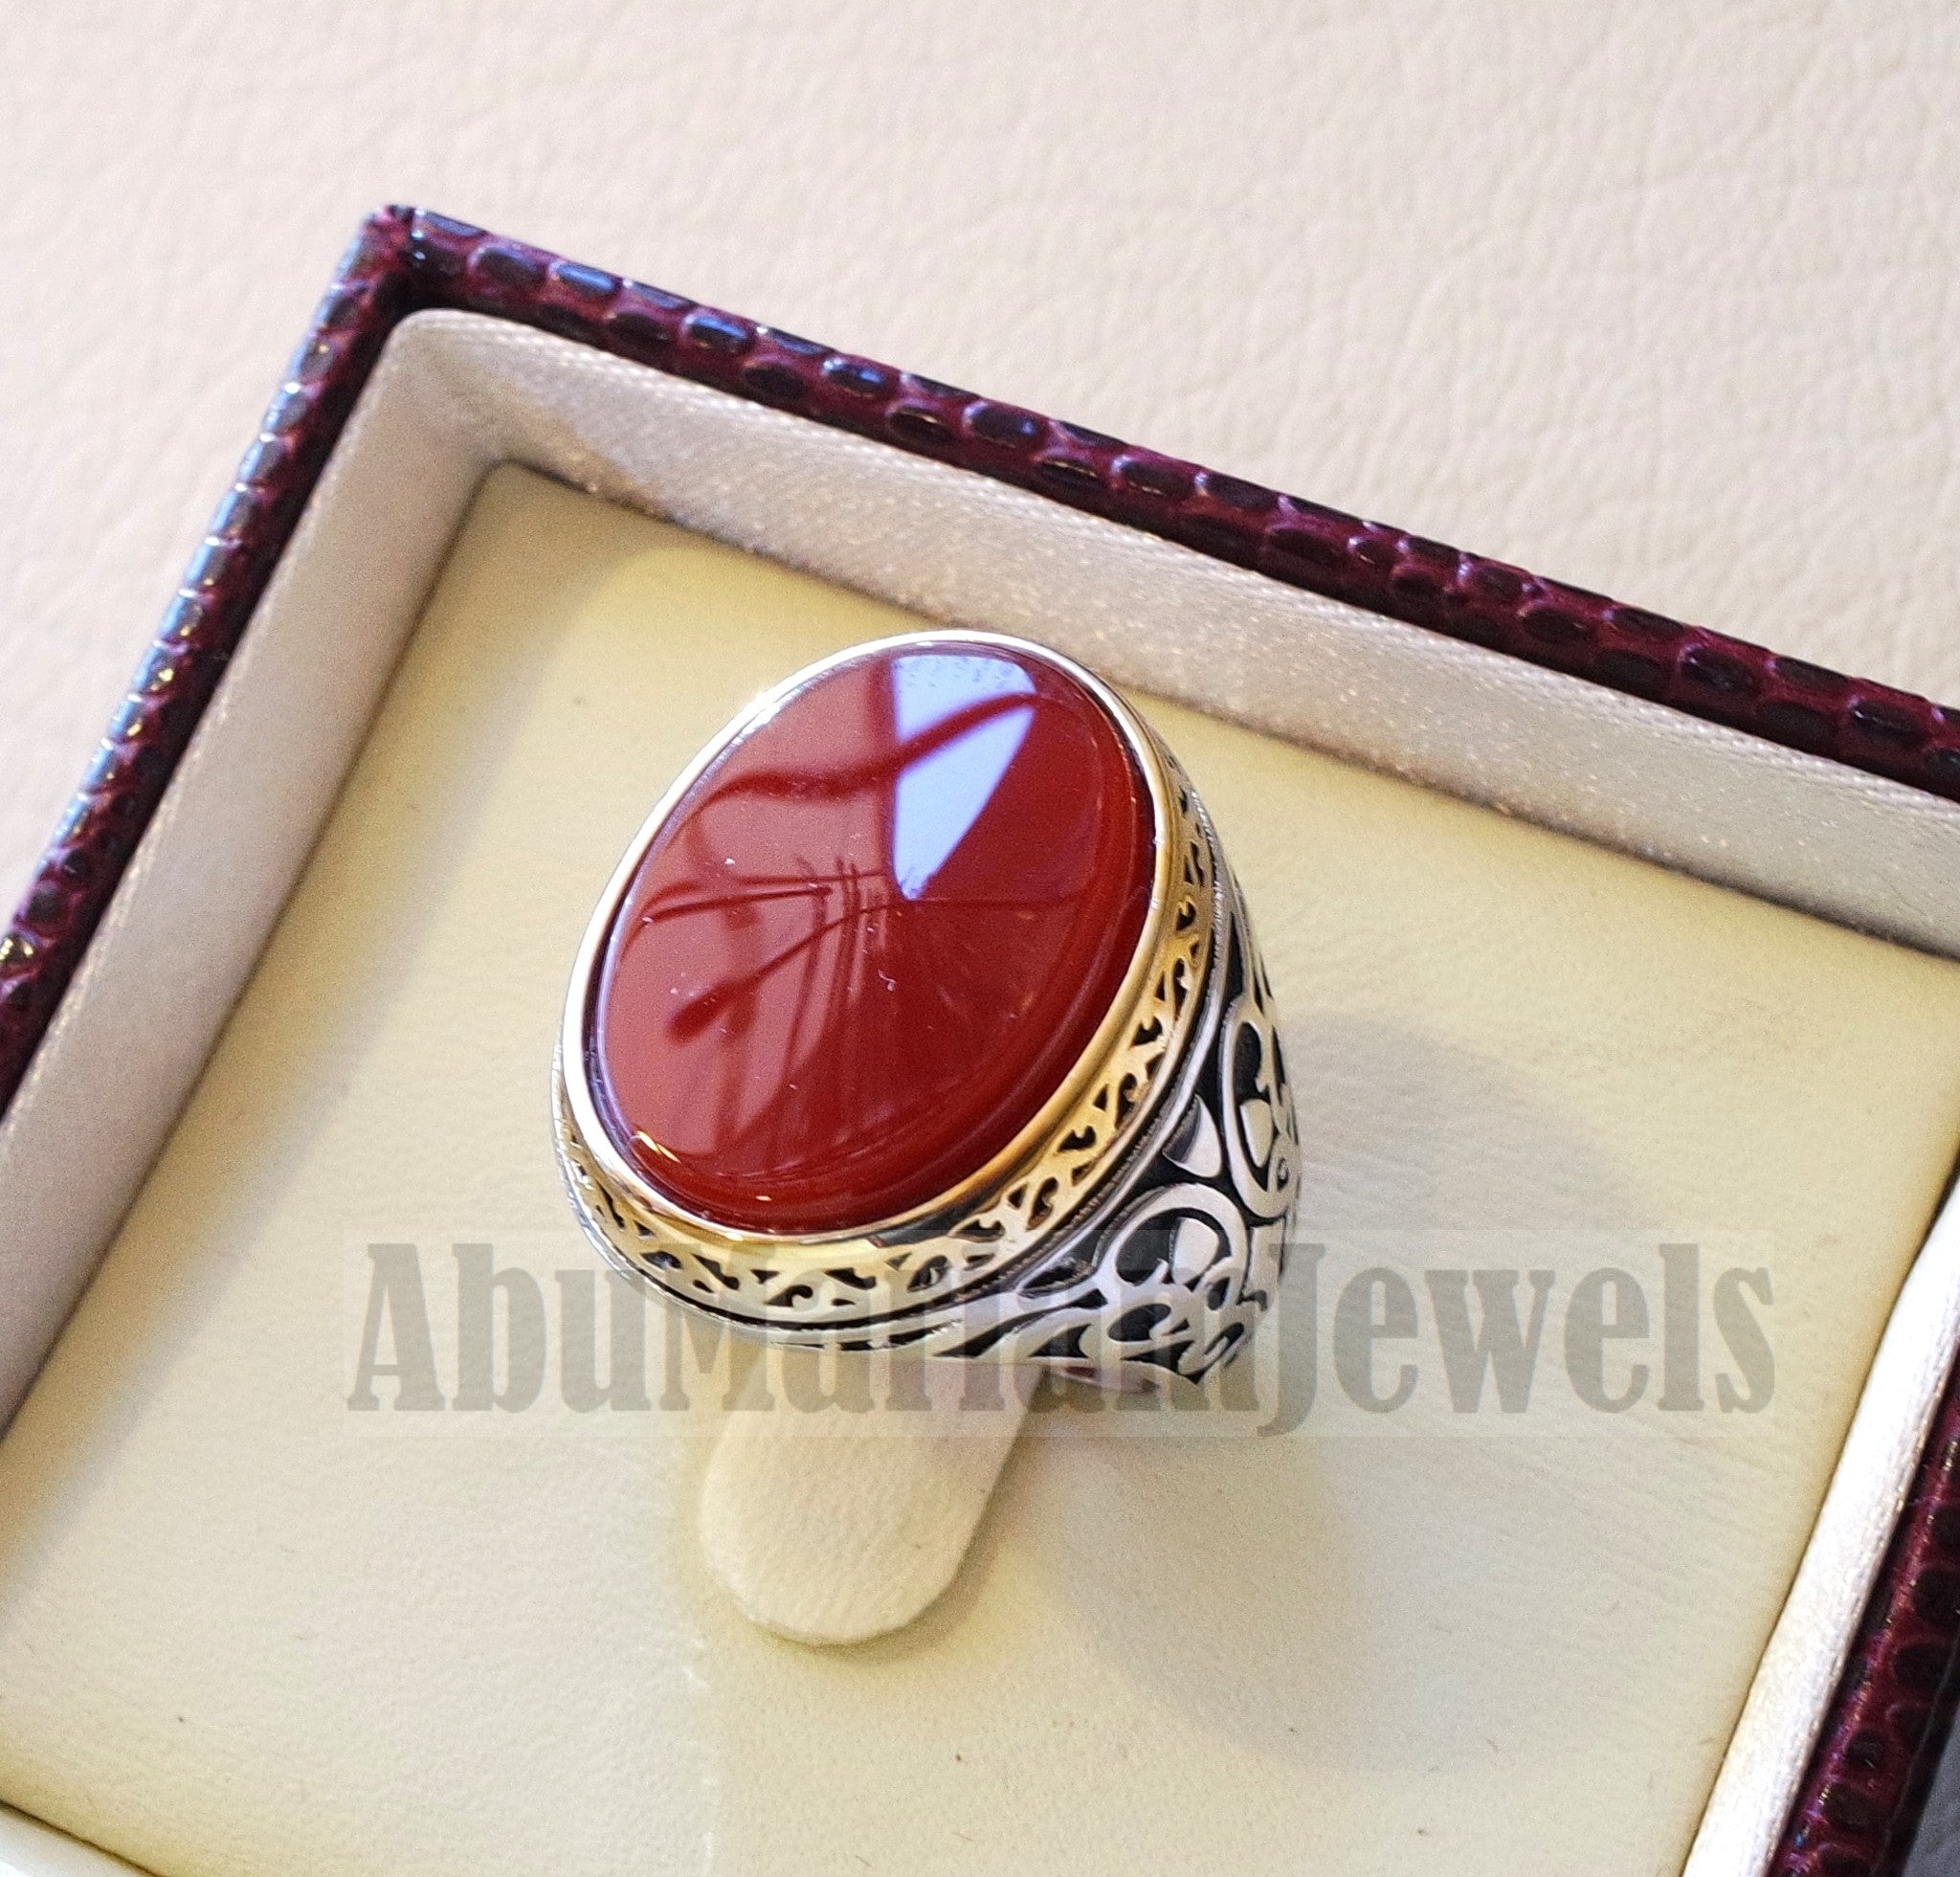 aqeeq natural flat agate carnelian stone oval red cabochon gem man ring sterling silver and yellow plating frame arabic turkey style